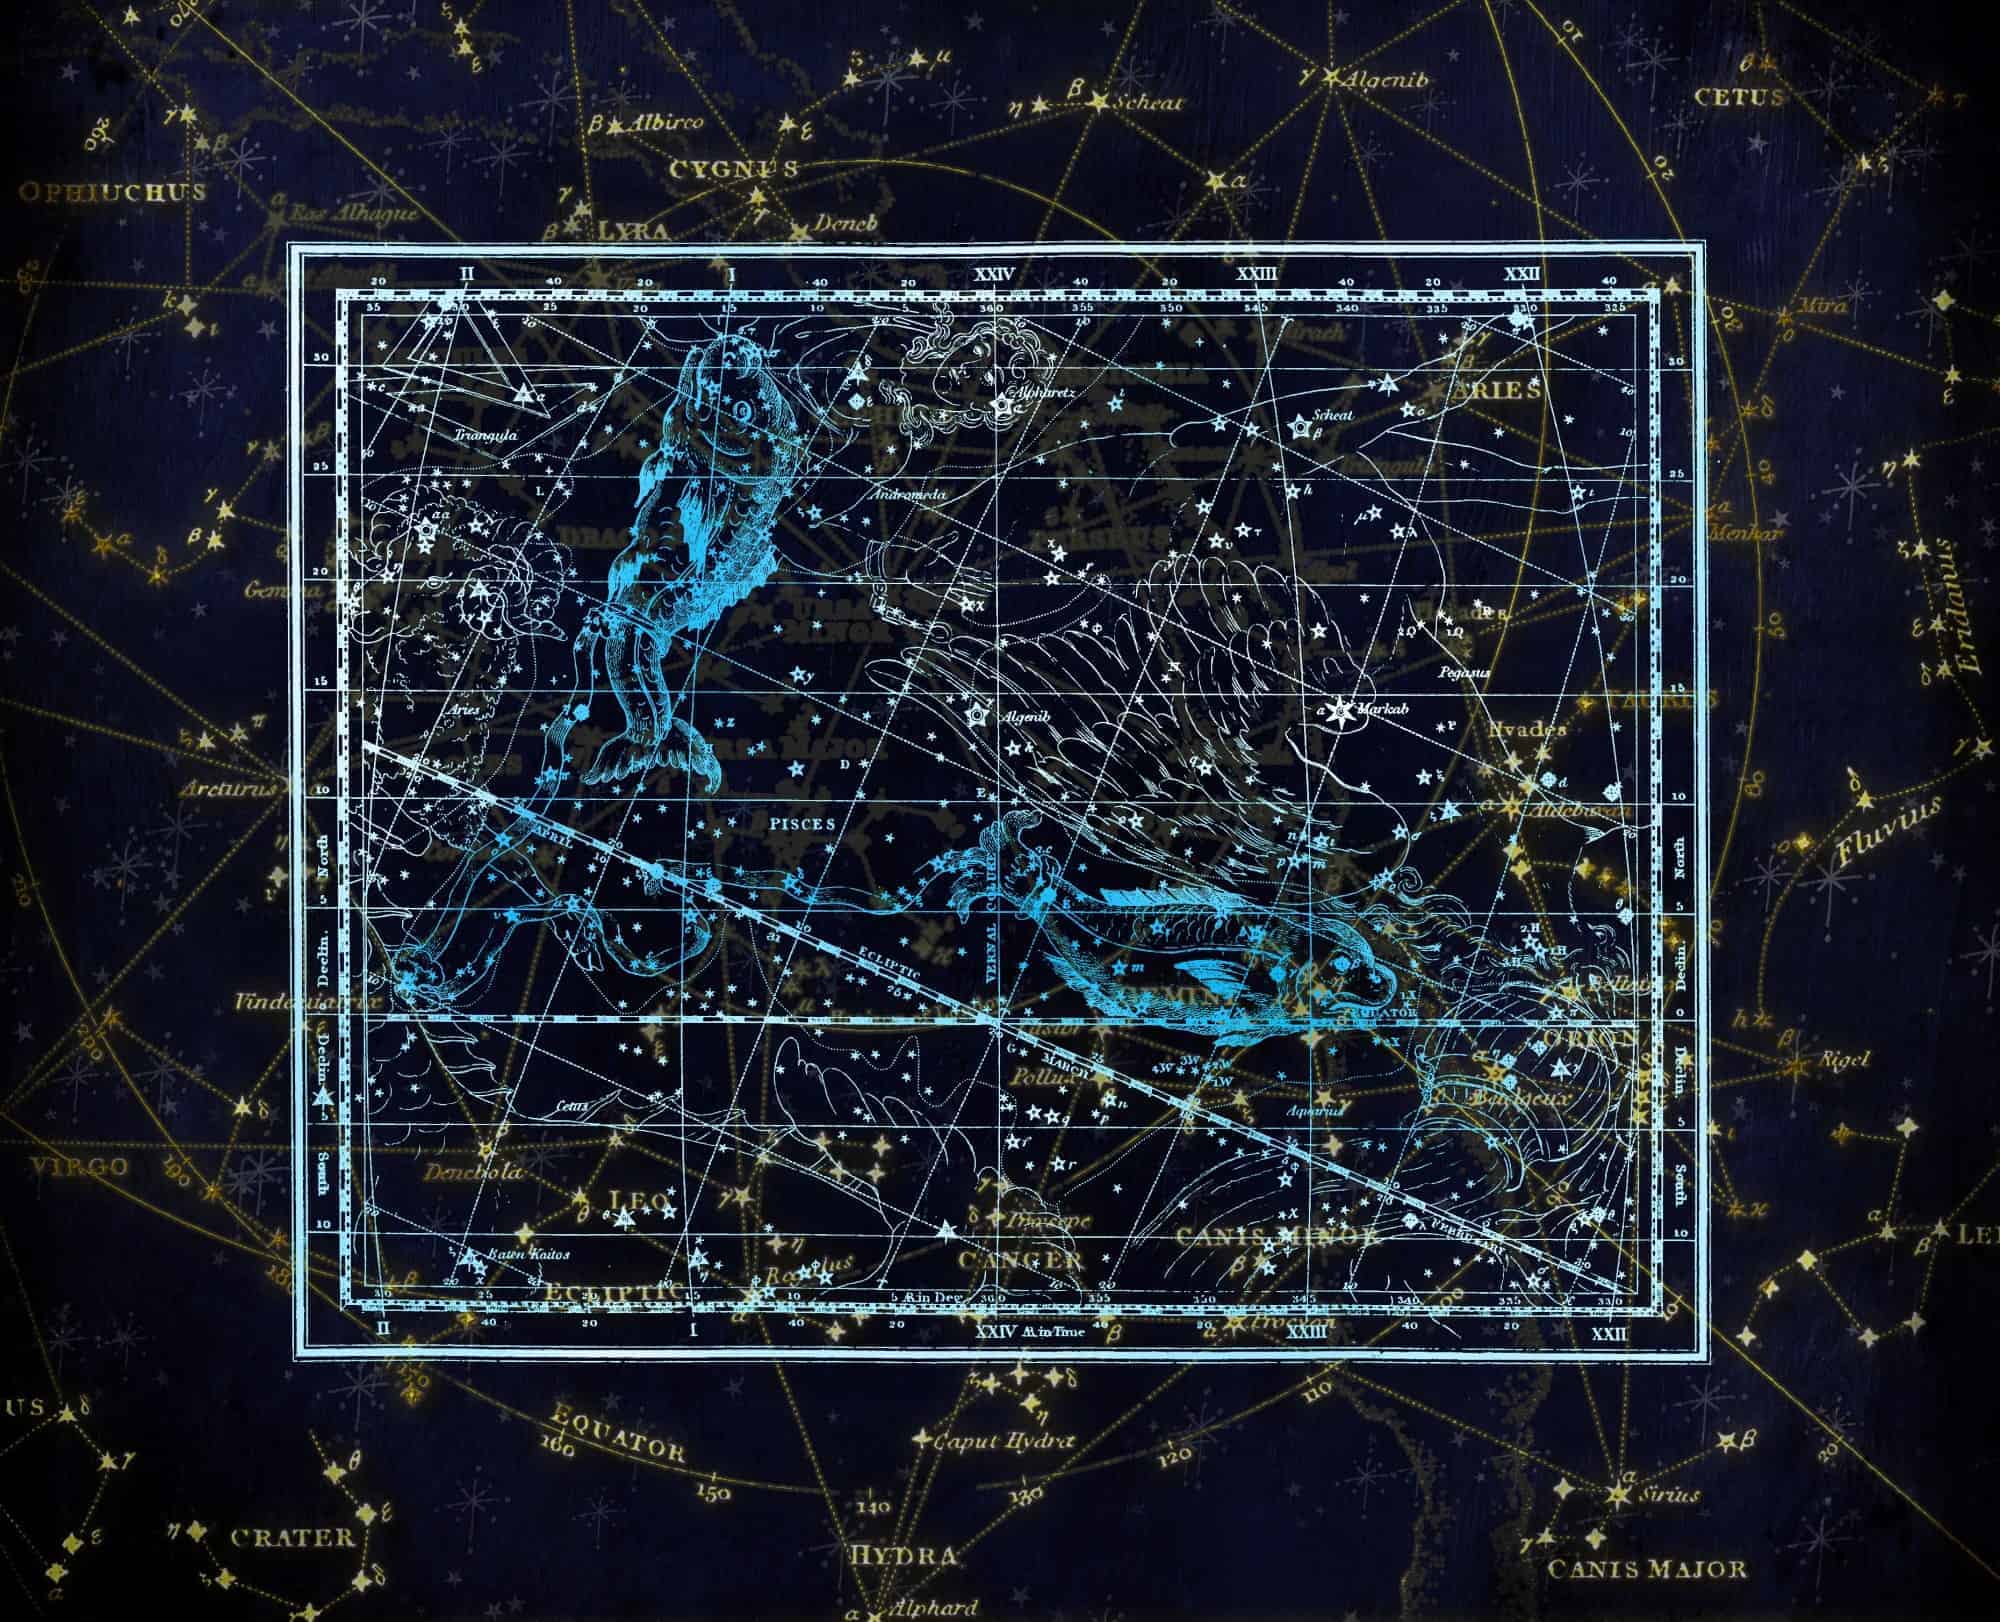 10 Fascinating Facts About the Pisces Constellation